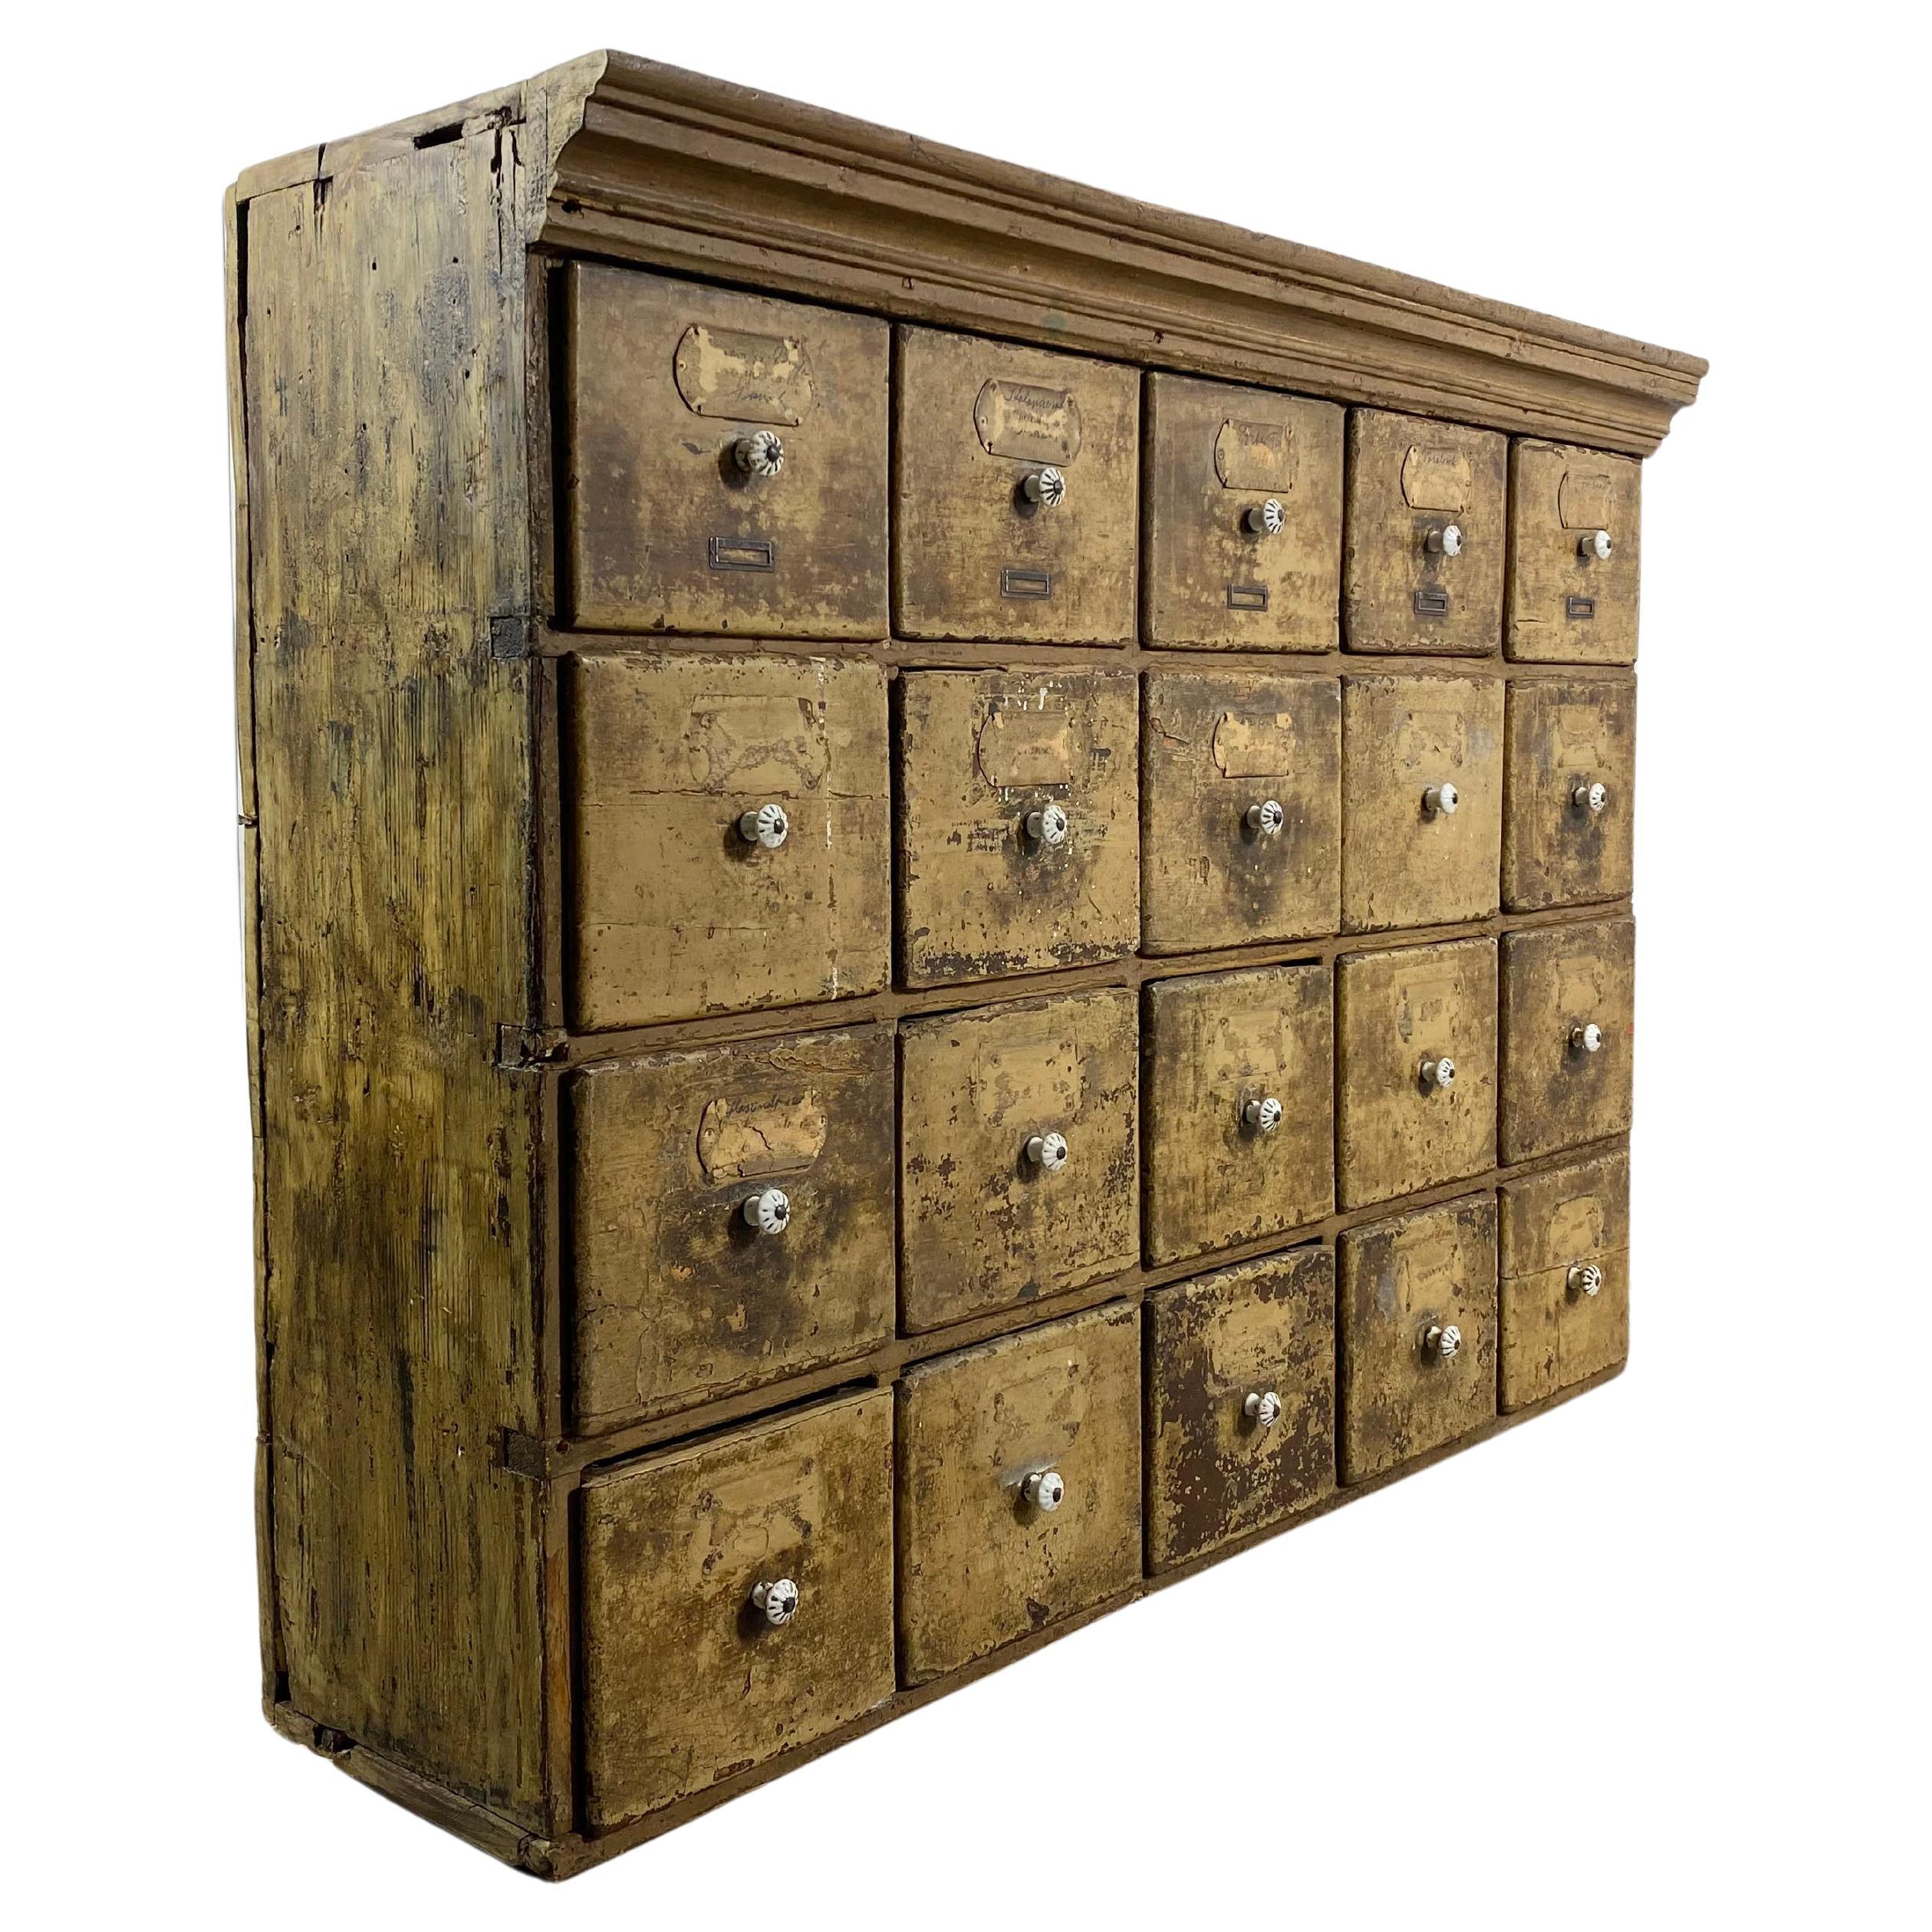 Mid-19th Century Hungarian Multi-Drawered Ironmongery Cabinet For Sale